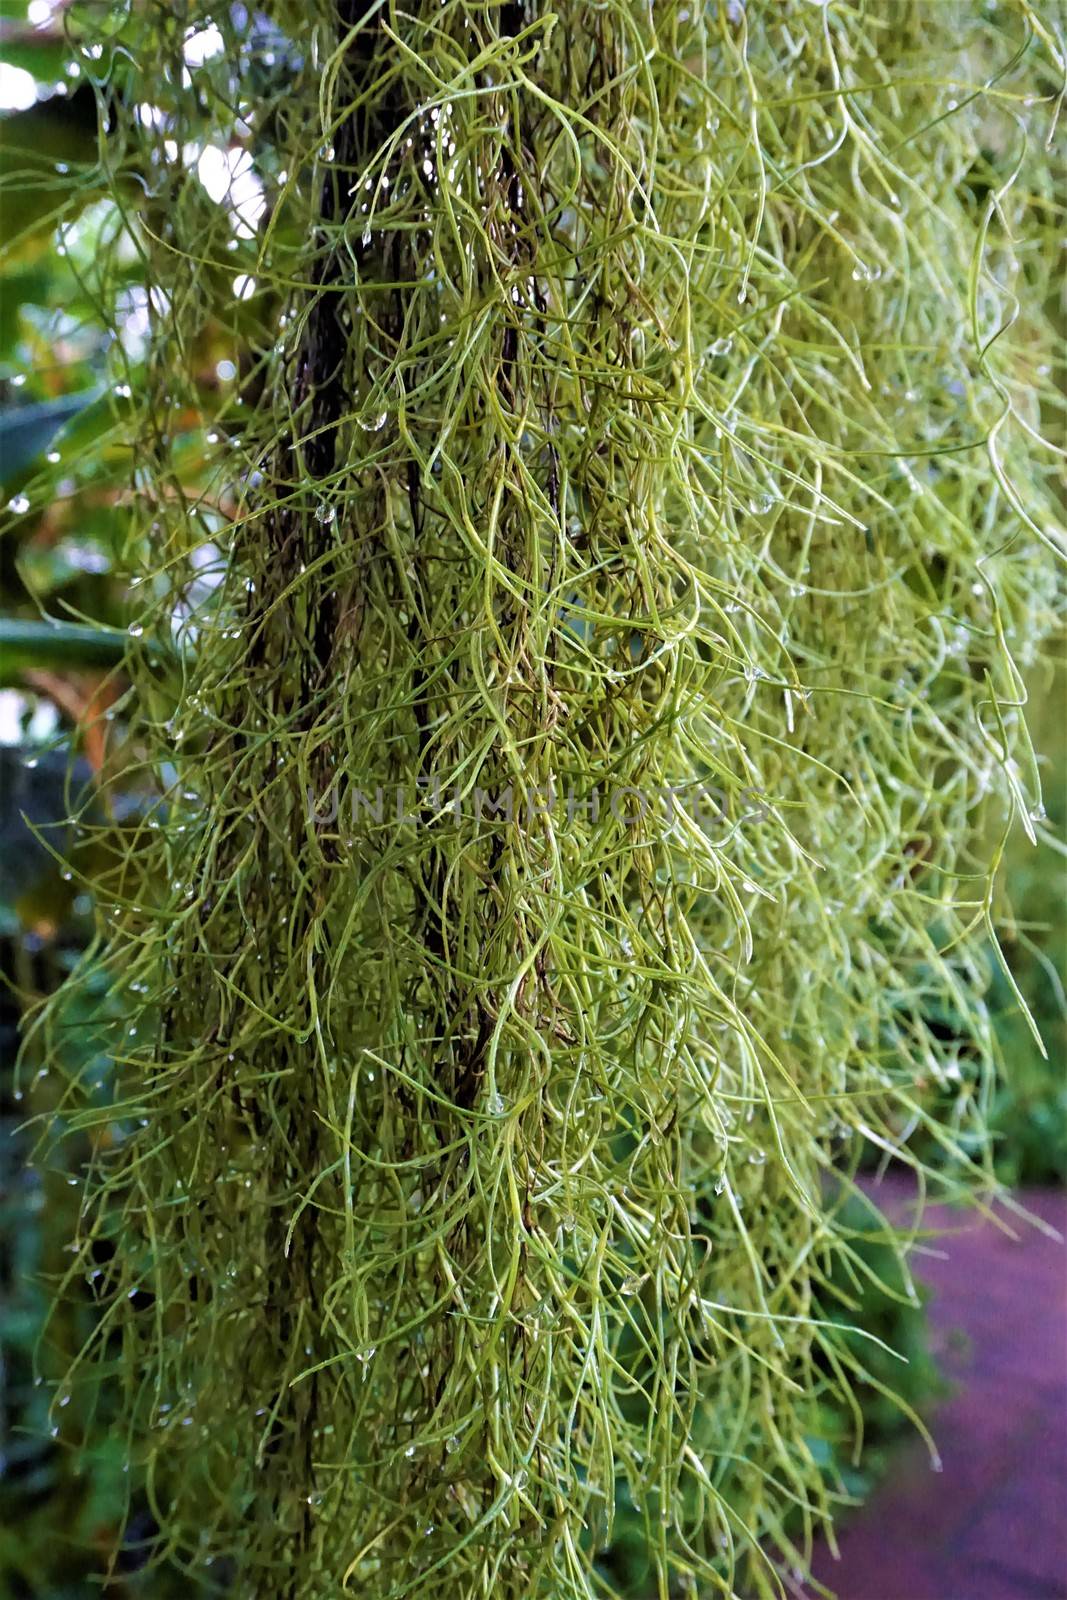 Curtain of wet Spanish moss - Tillandis usneoides - with drops